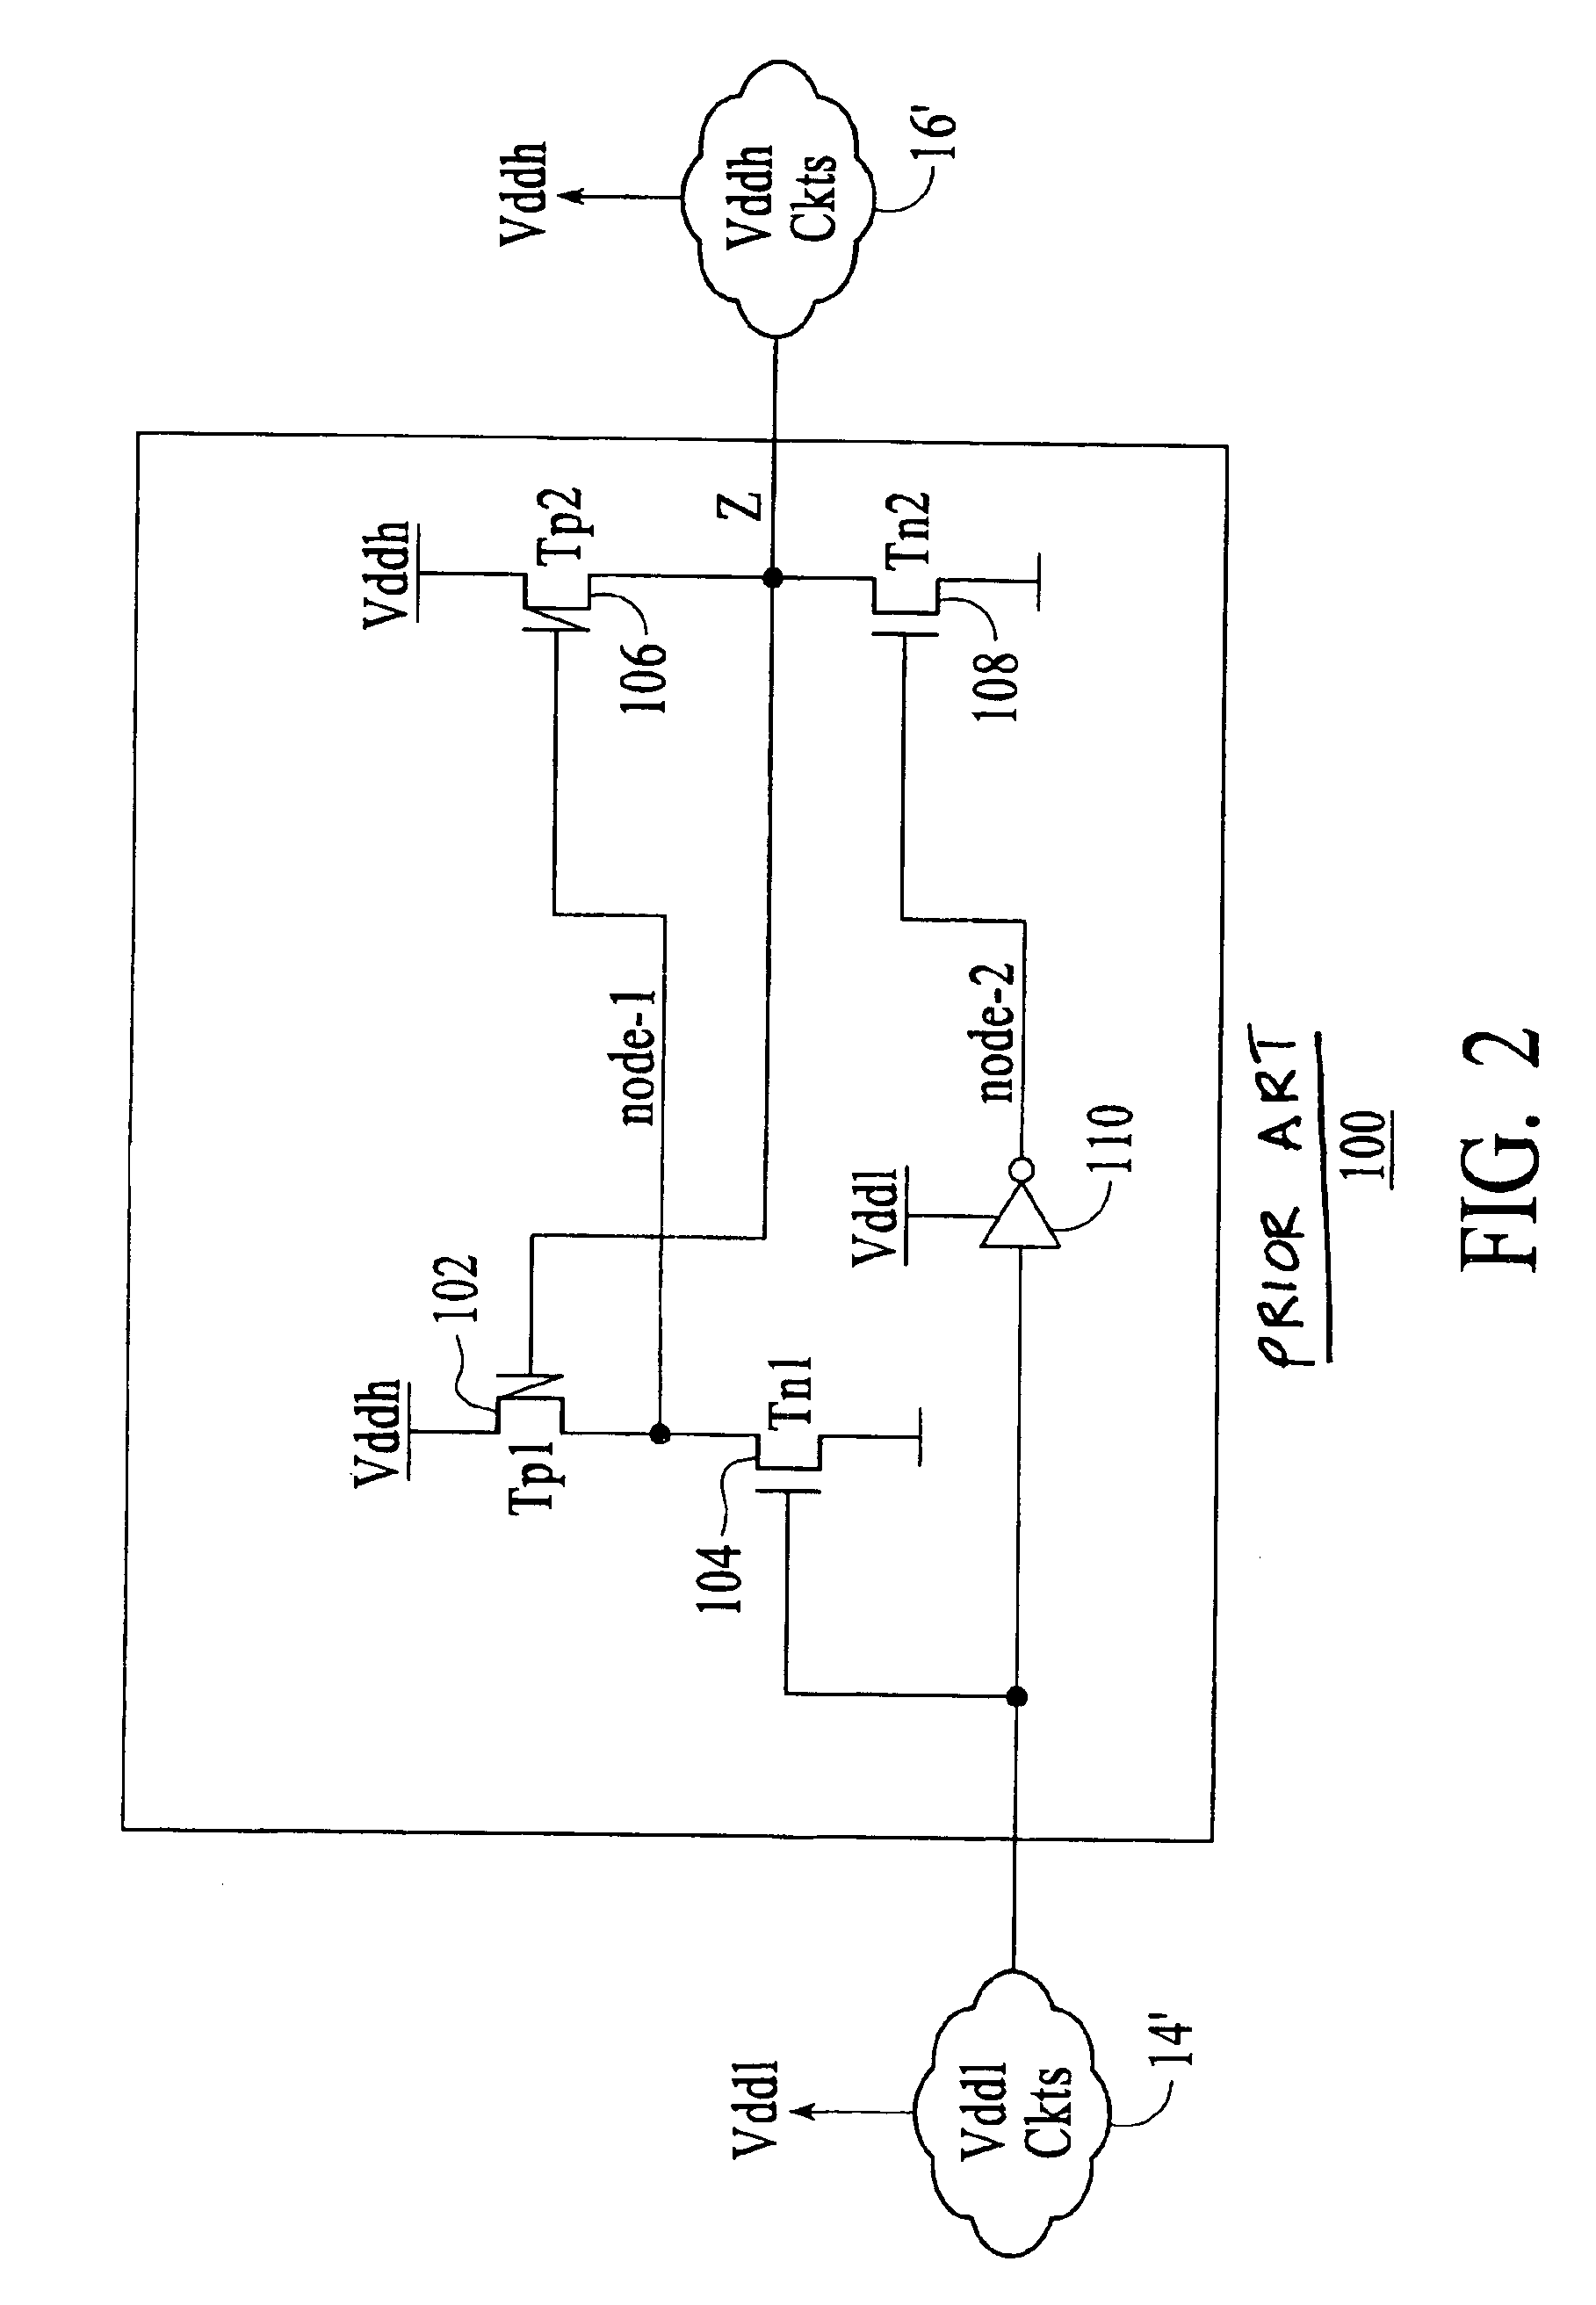 Level translator circuit for power supply disablement